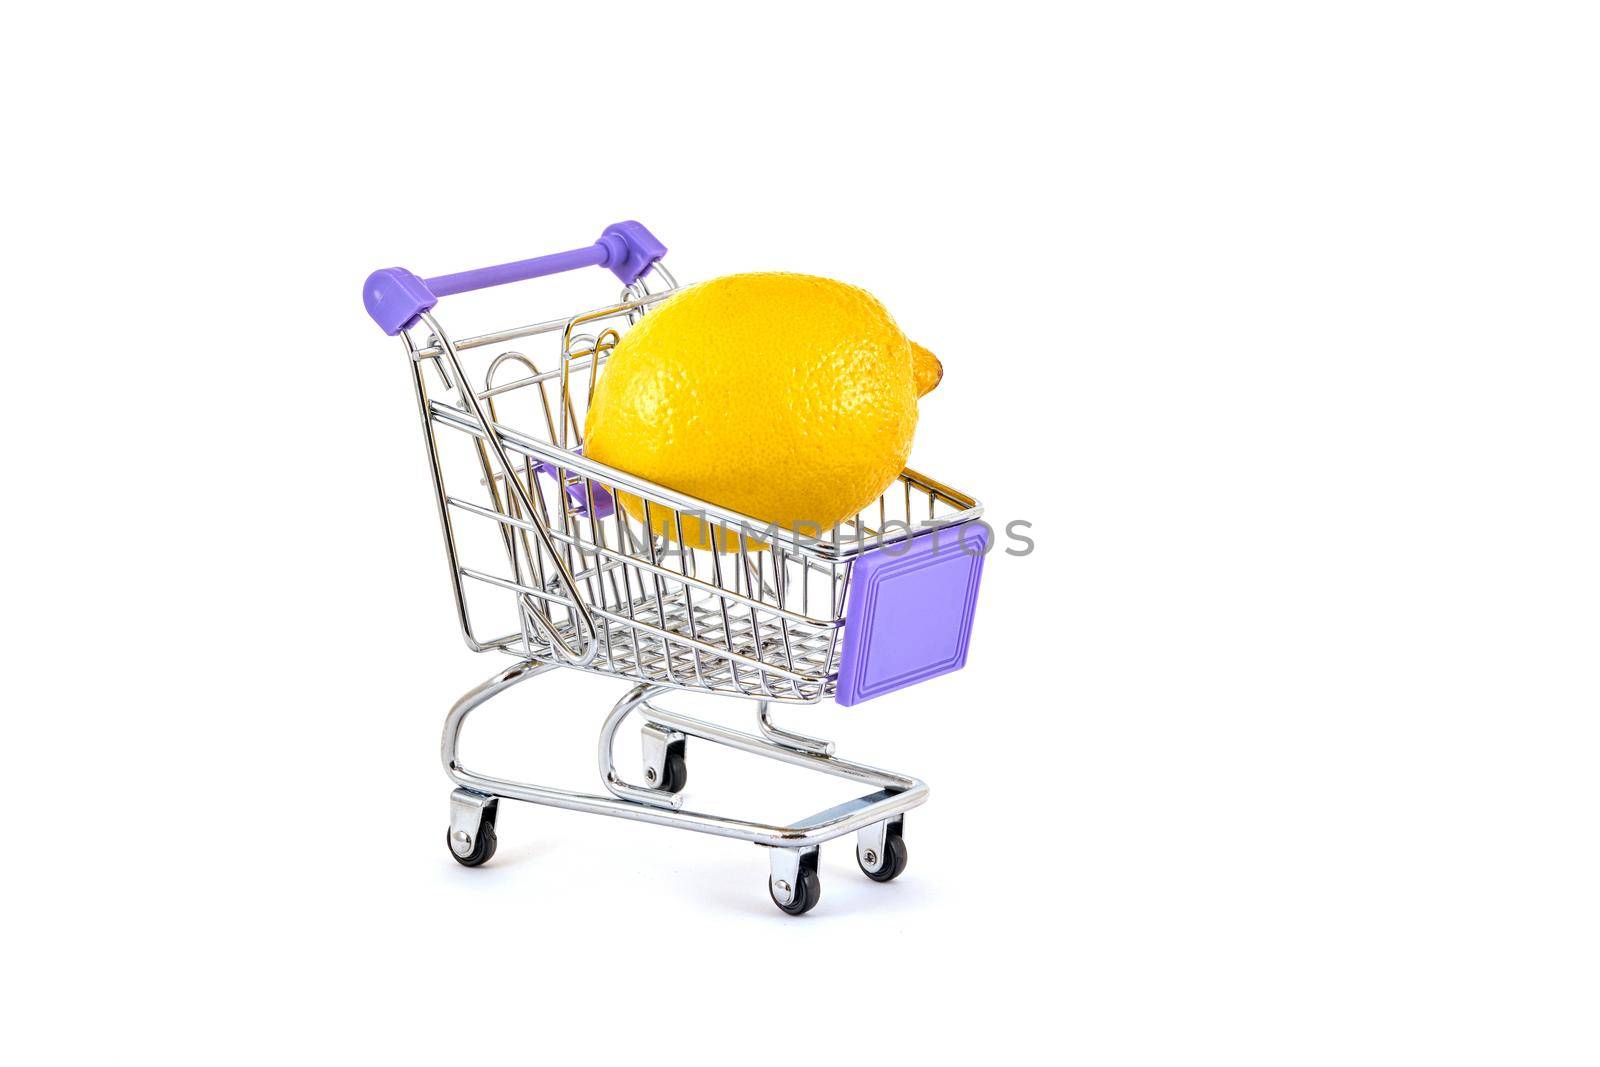 A ripe yellow lemon lies in a small supermarket trolley on a white background, close up